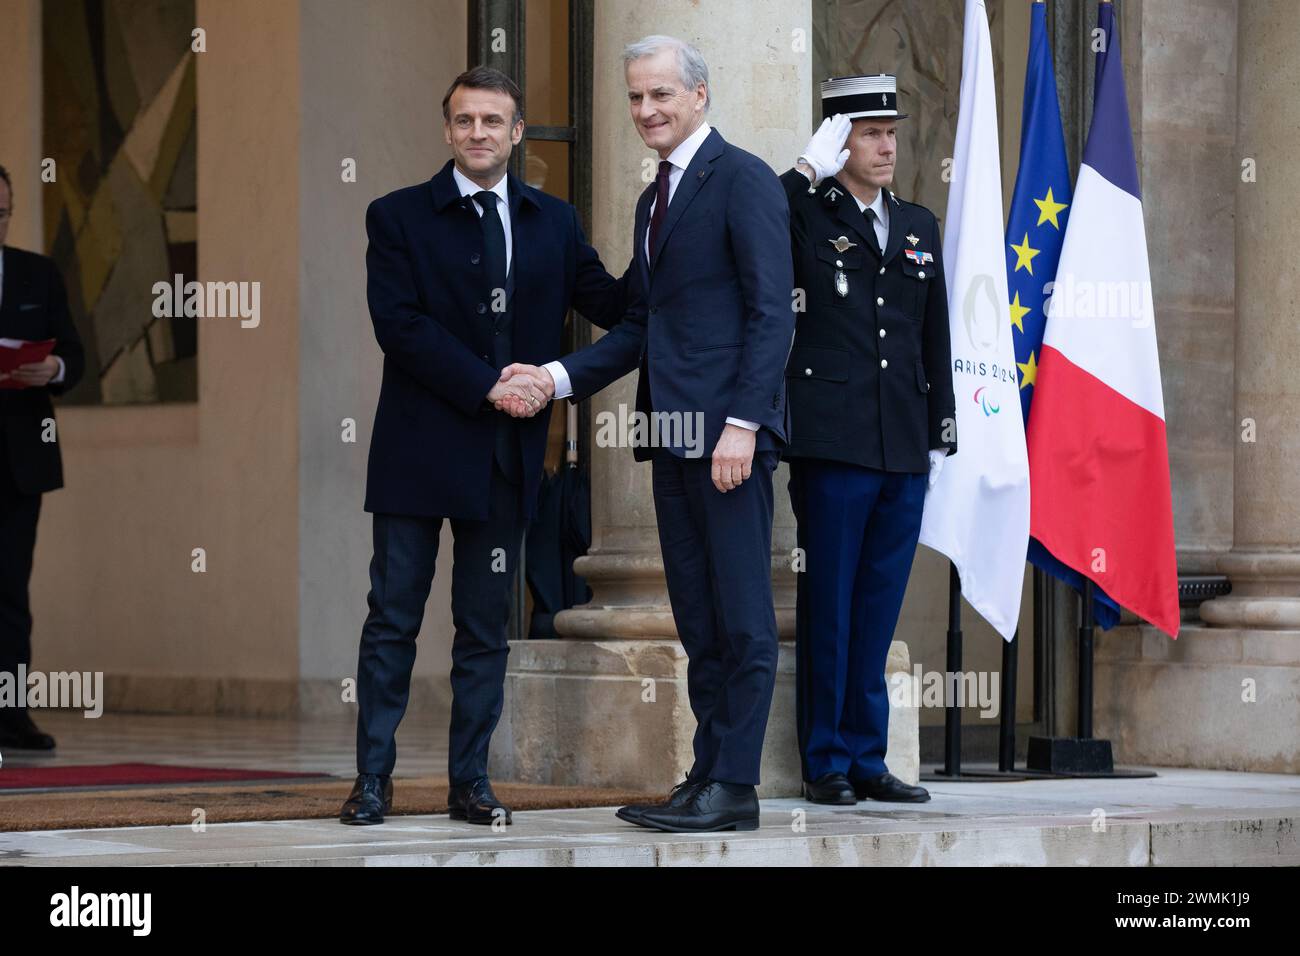 Paris, France, Monday 26 february 2024, Support Conference for Ukraine, M Jonas Gahr Store, Head of Government of Norway, Emmanuel Macron, French President, Credit François Loock / Alamy Live News Stock Photo